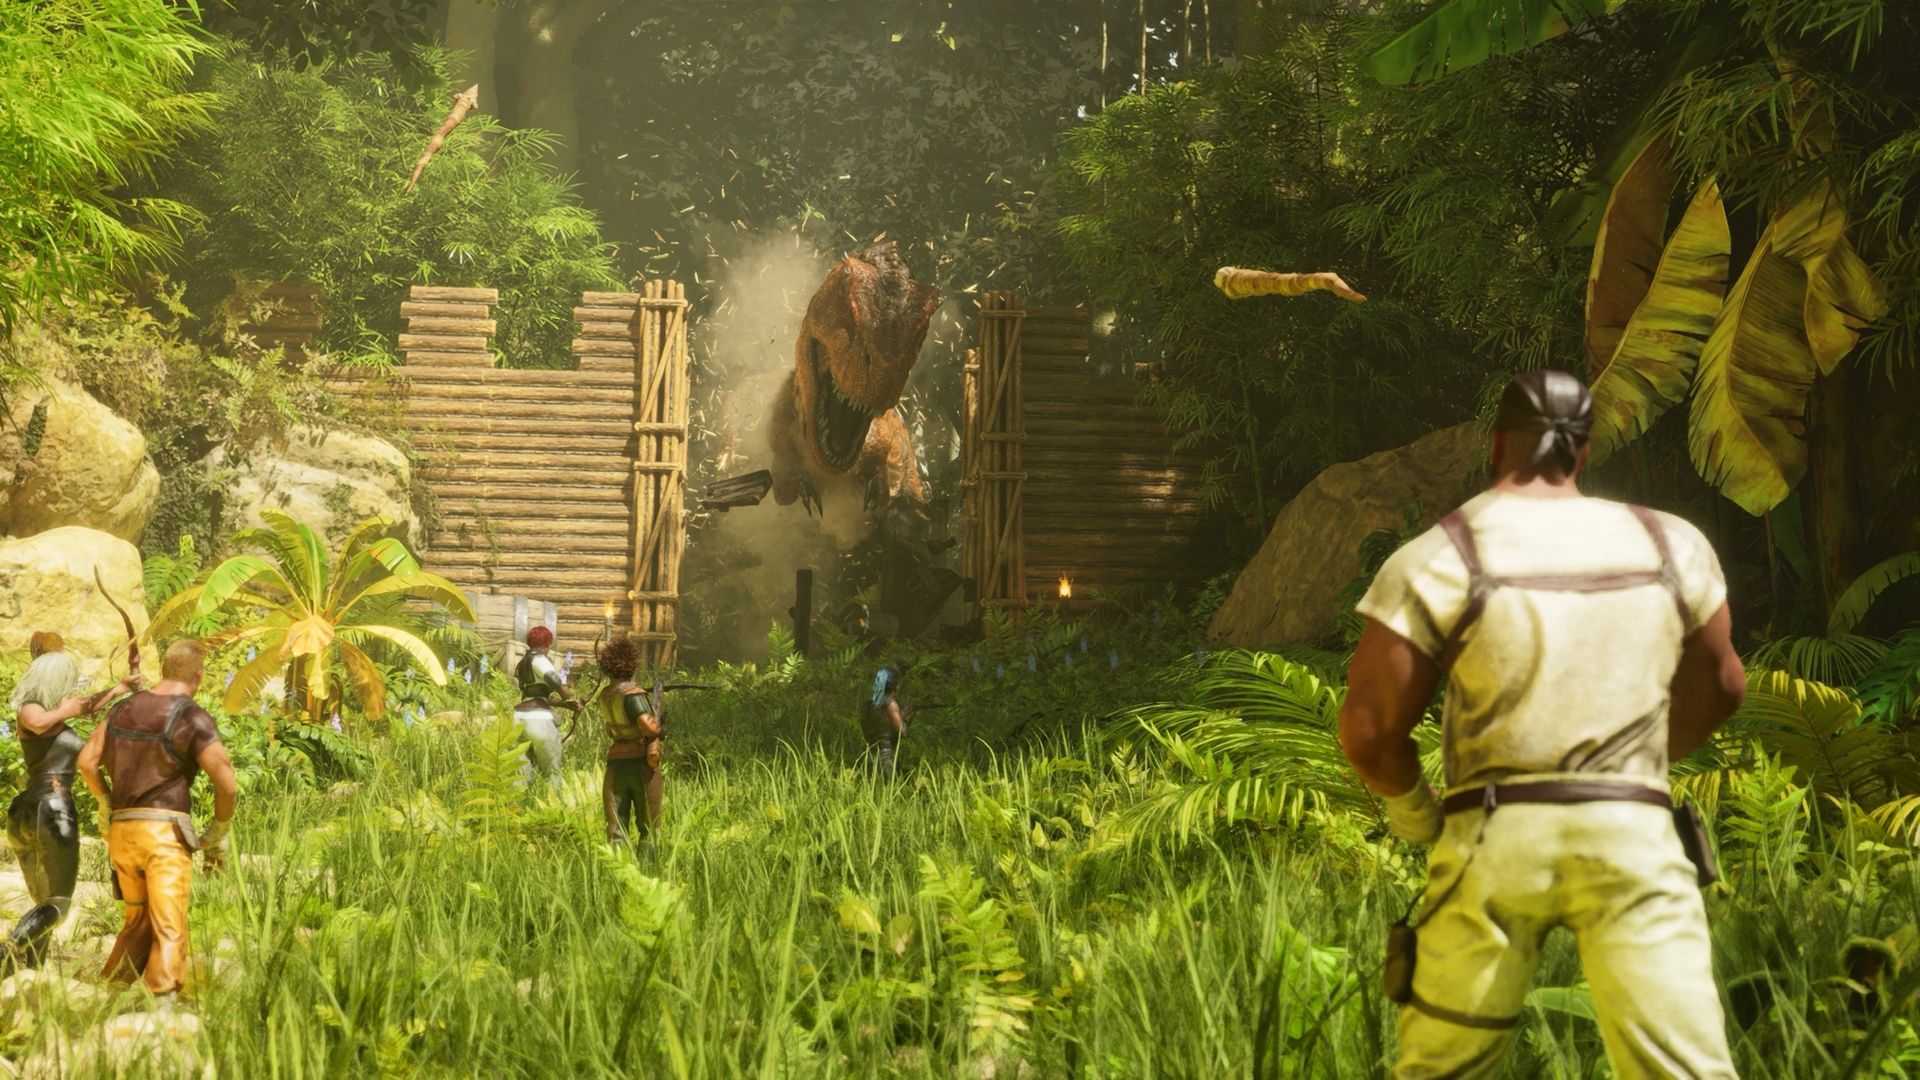 Will Ark 2 be Xbox Exclusive?